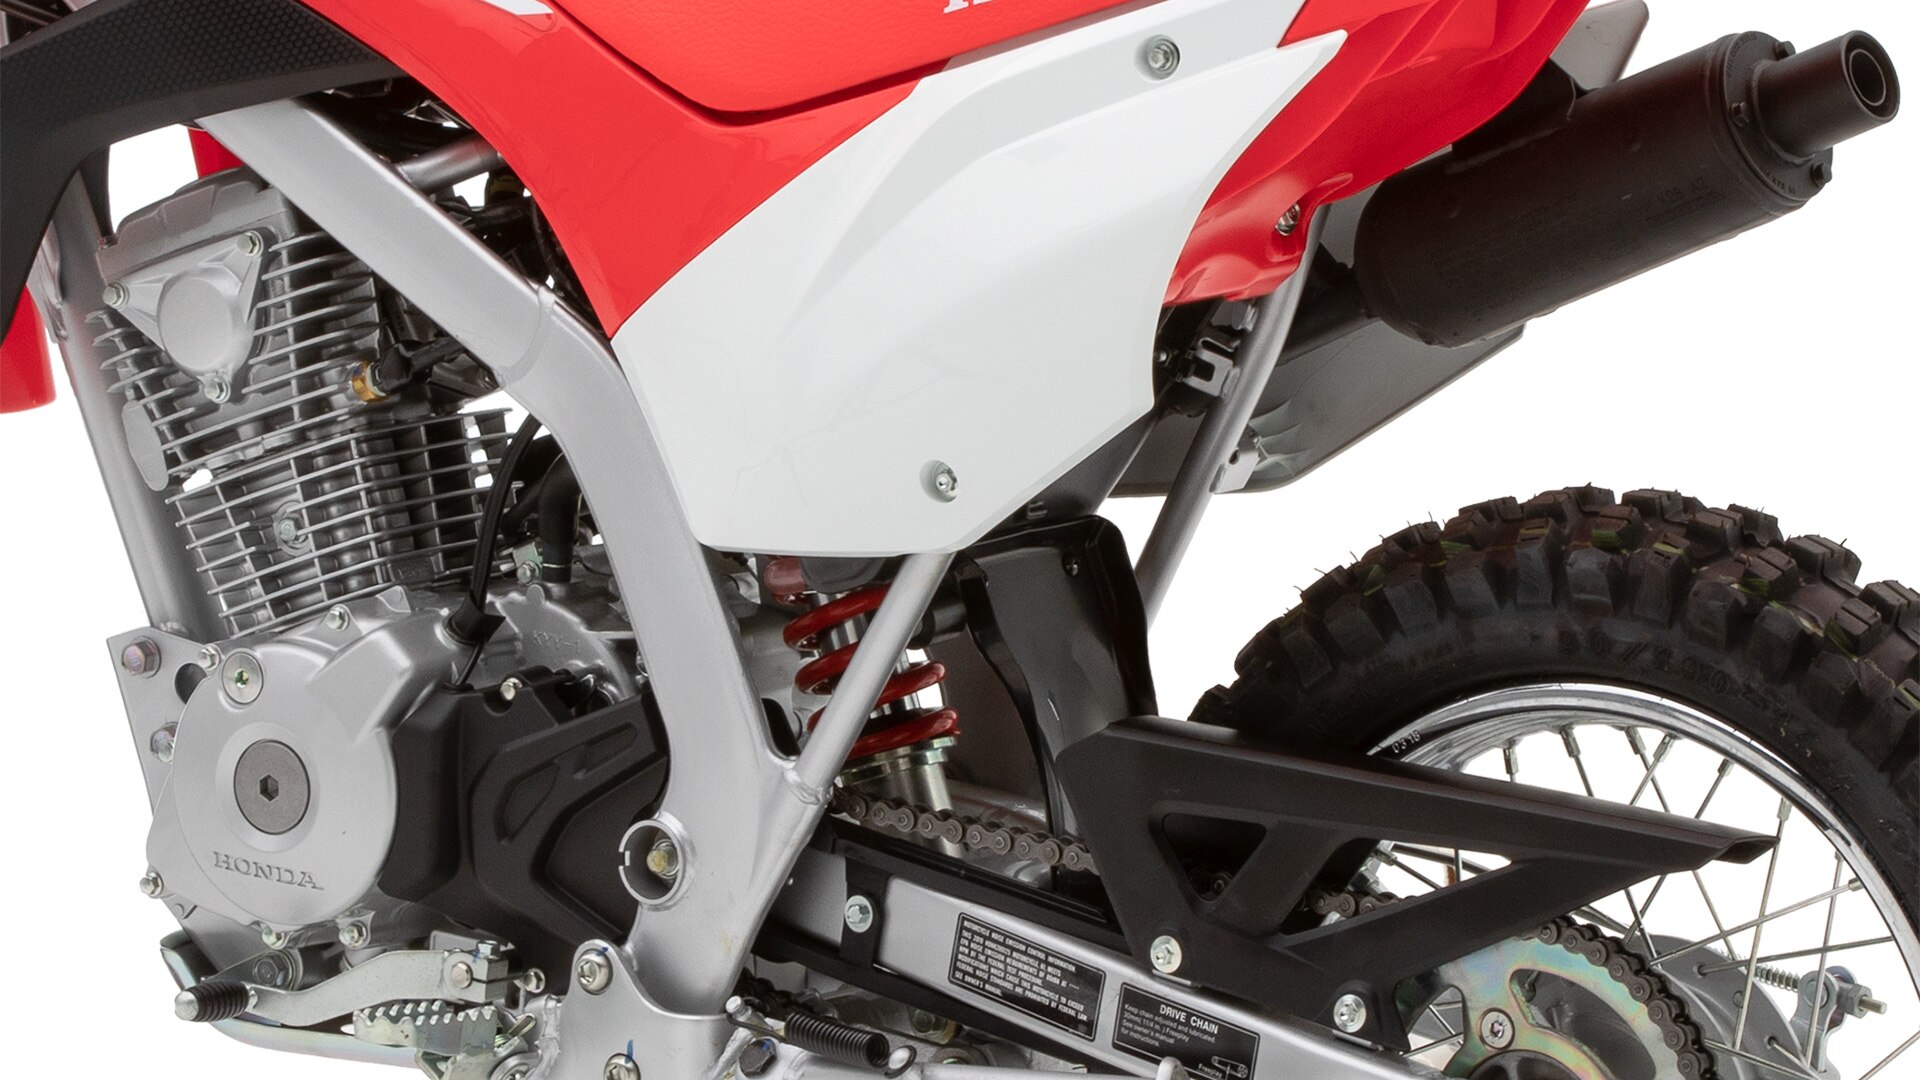 Close-up of CRF125F rear fairing, frame and 4-stroke engine.